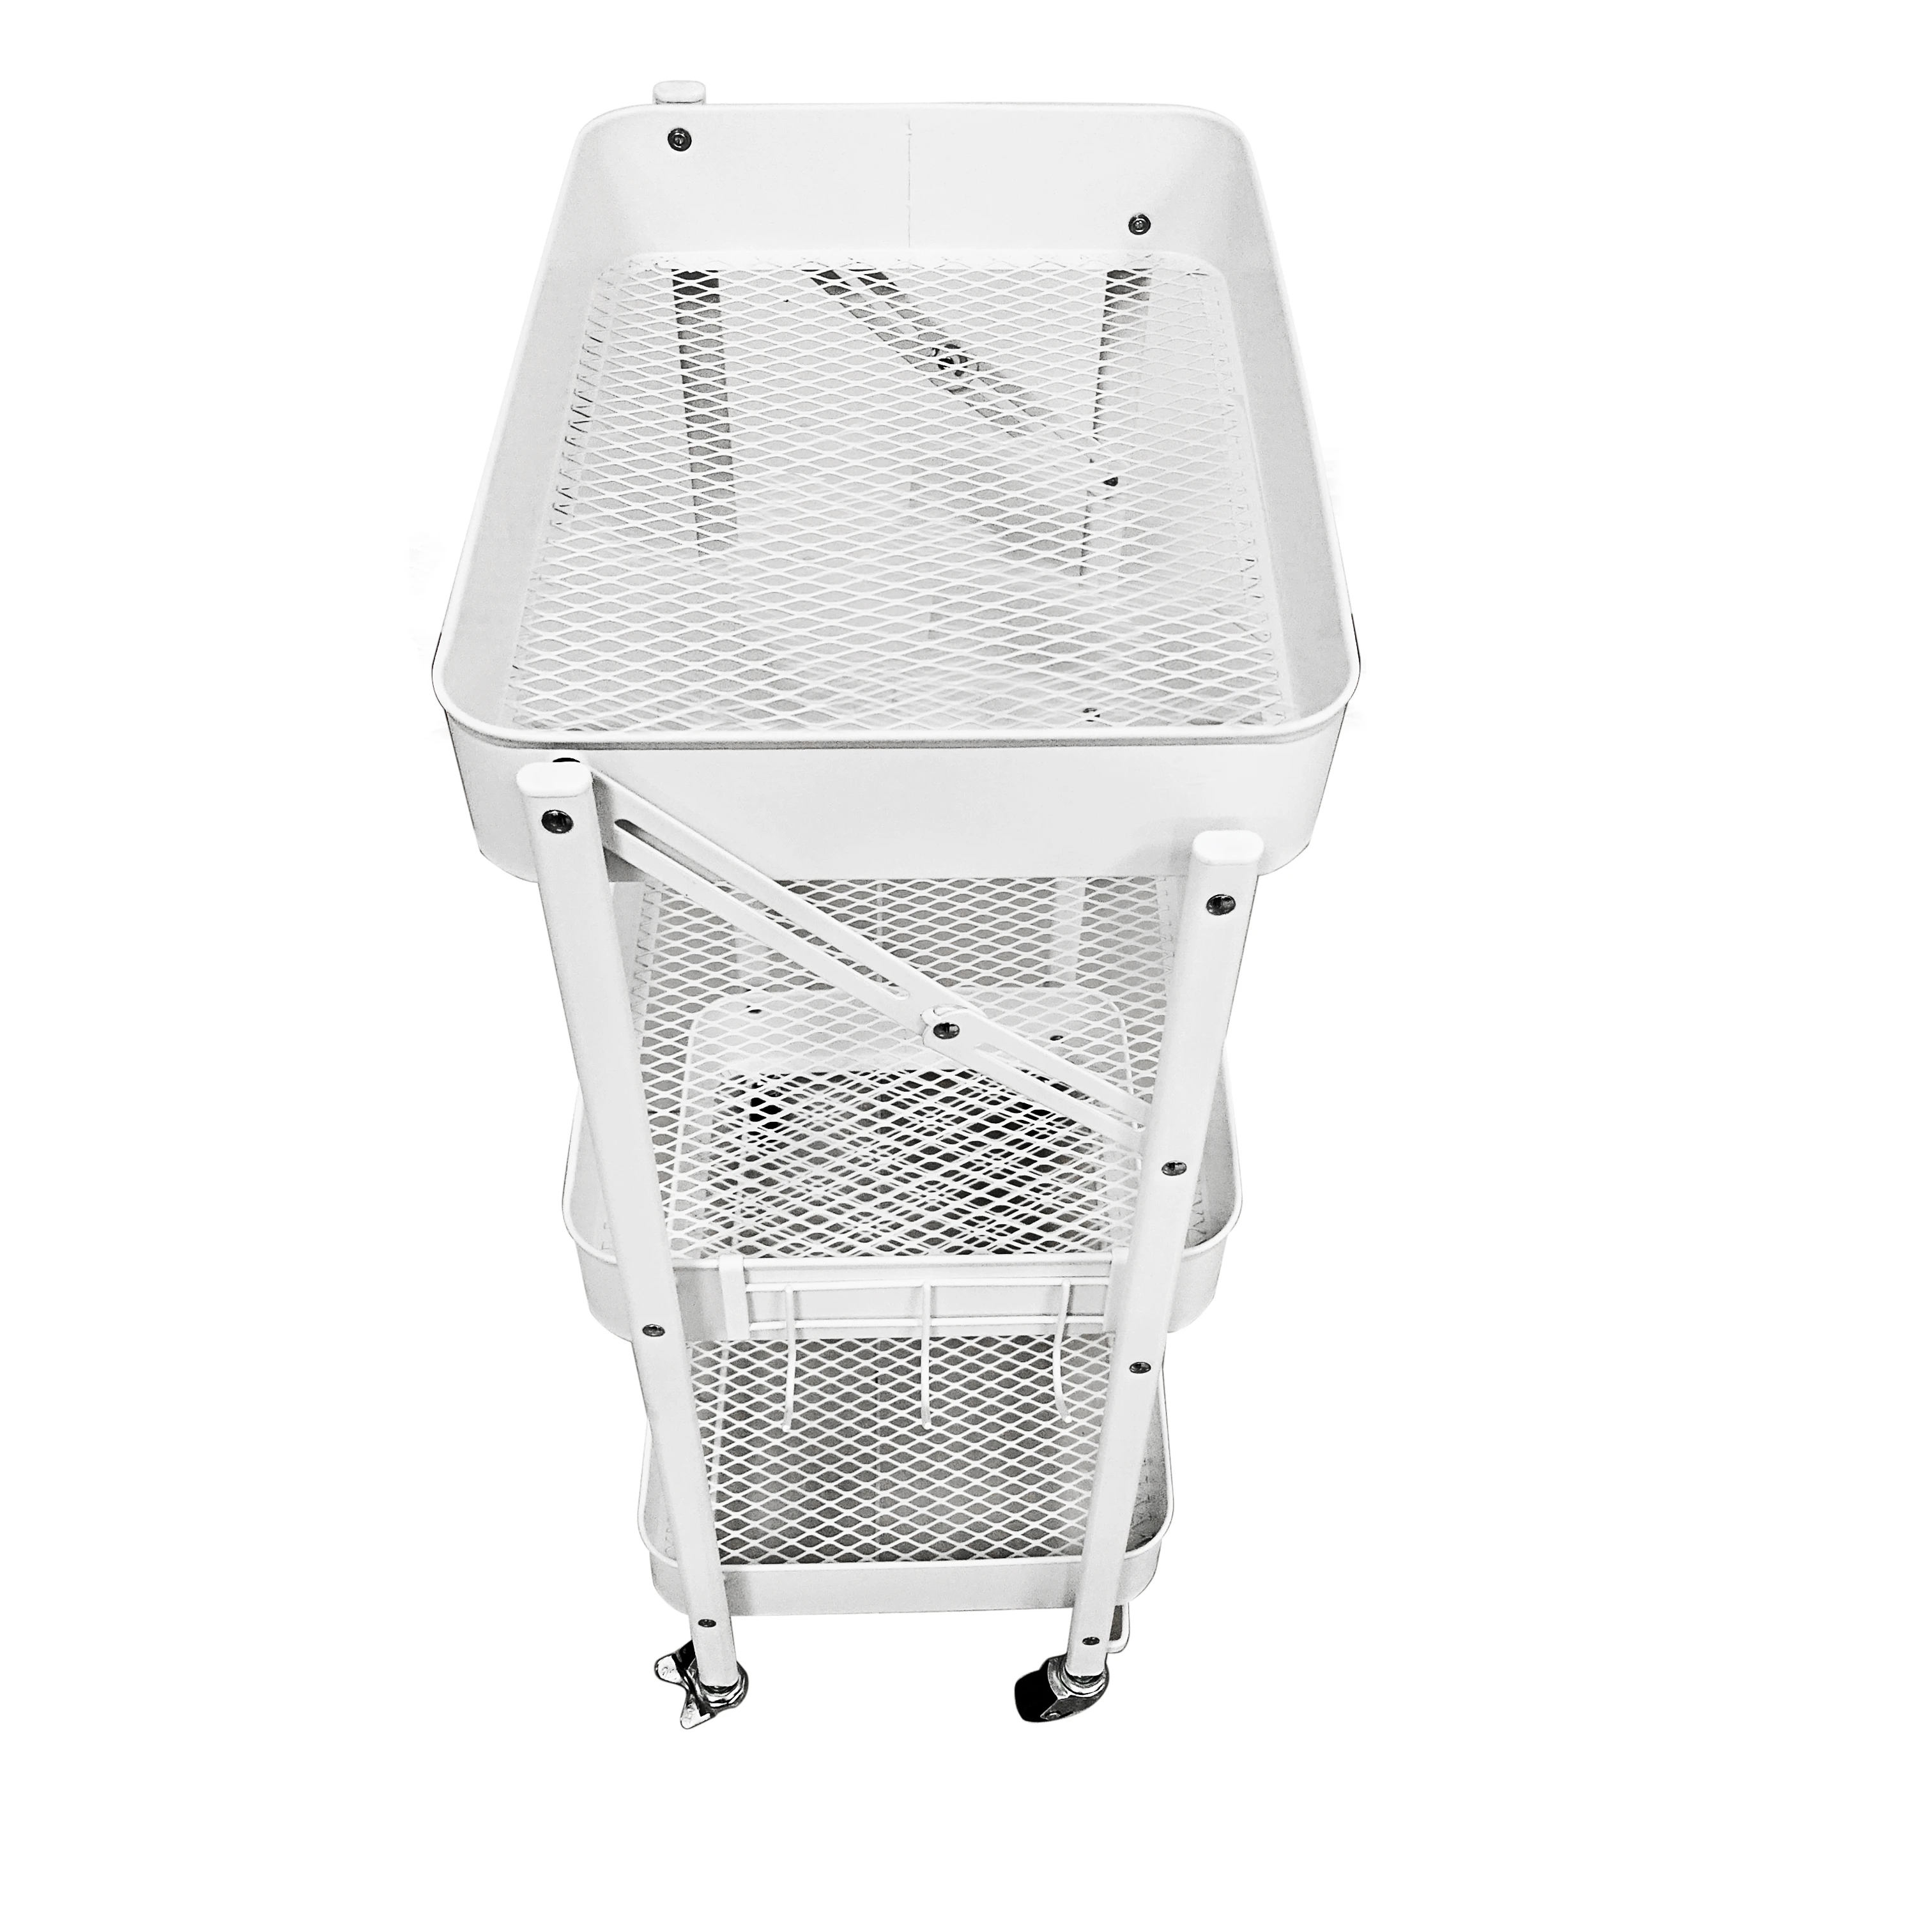 Metal Mobile Utility Rolling Cart 3 Tiers Storage Trolley Cart kitchen vegetable trolley